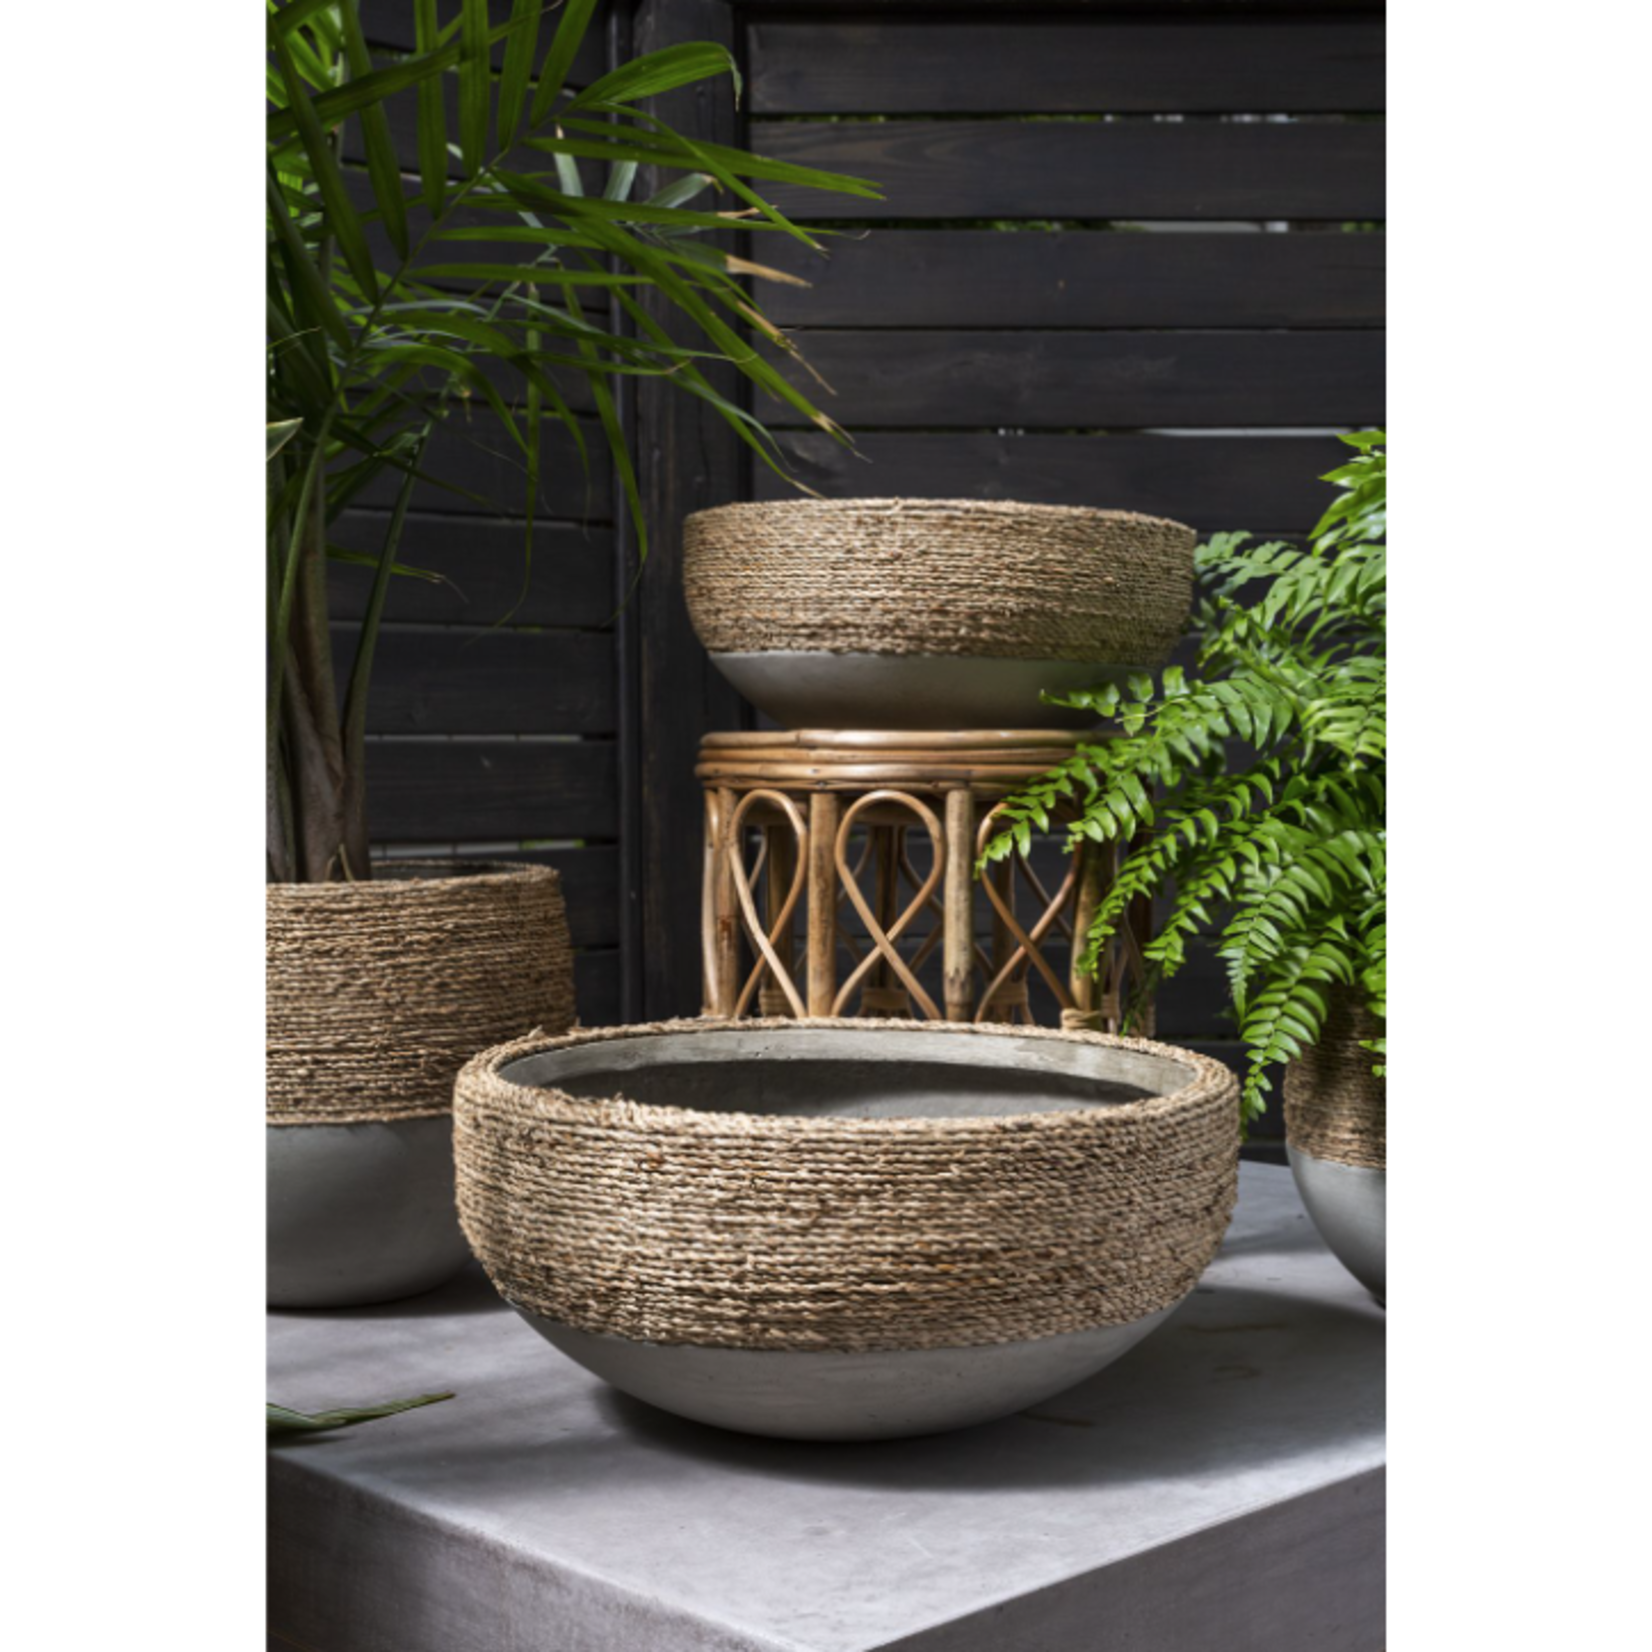 8”h x 17” CONCRETE REED BOWL WITH NATURAL ROPE